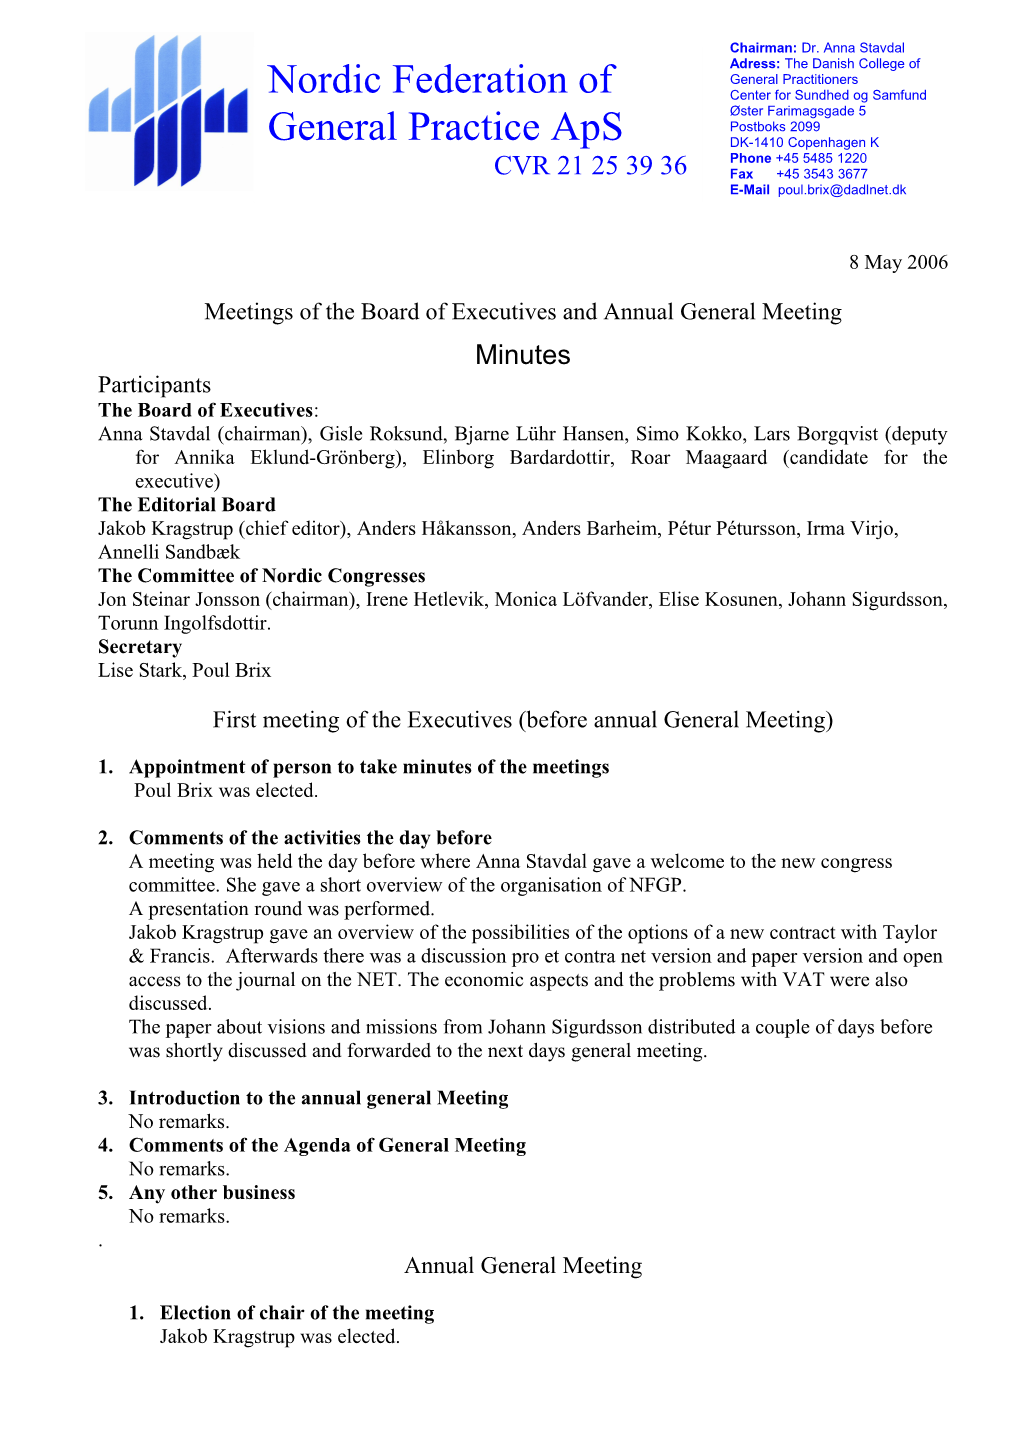 Meetings of the Board of Executives and Annual General Meeting